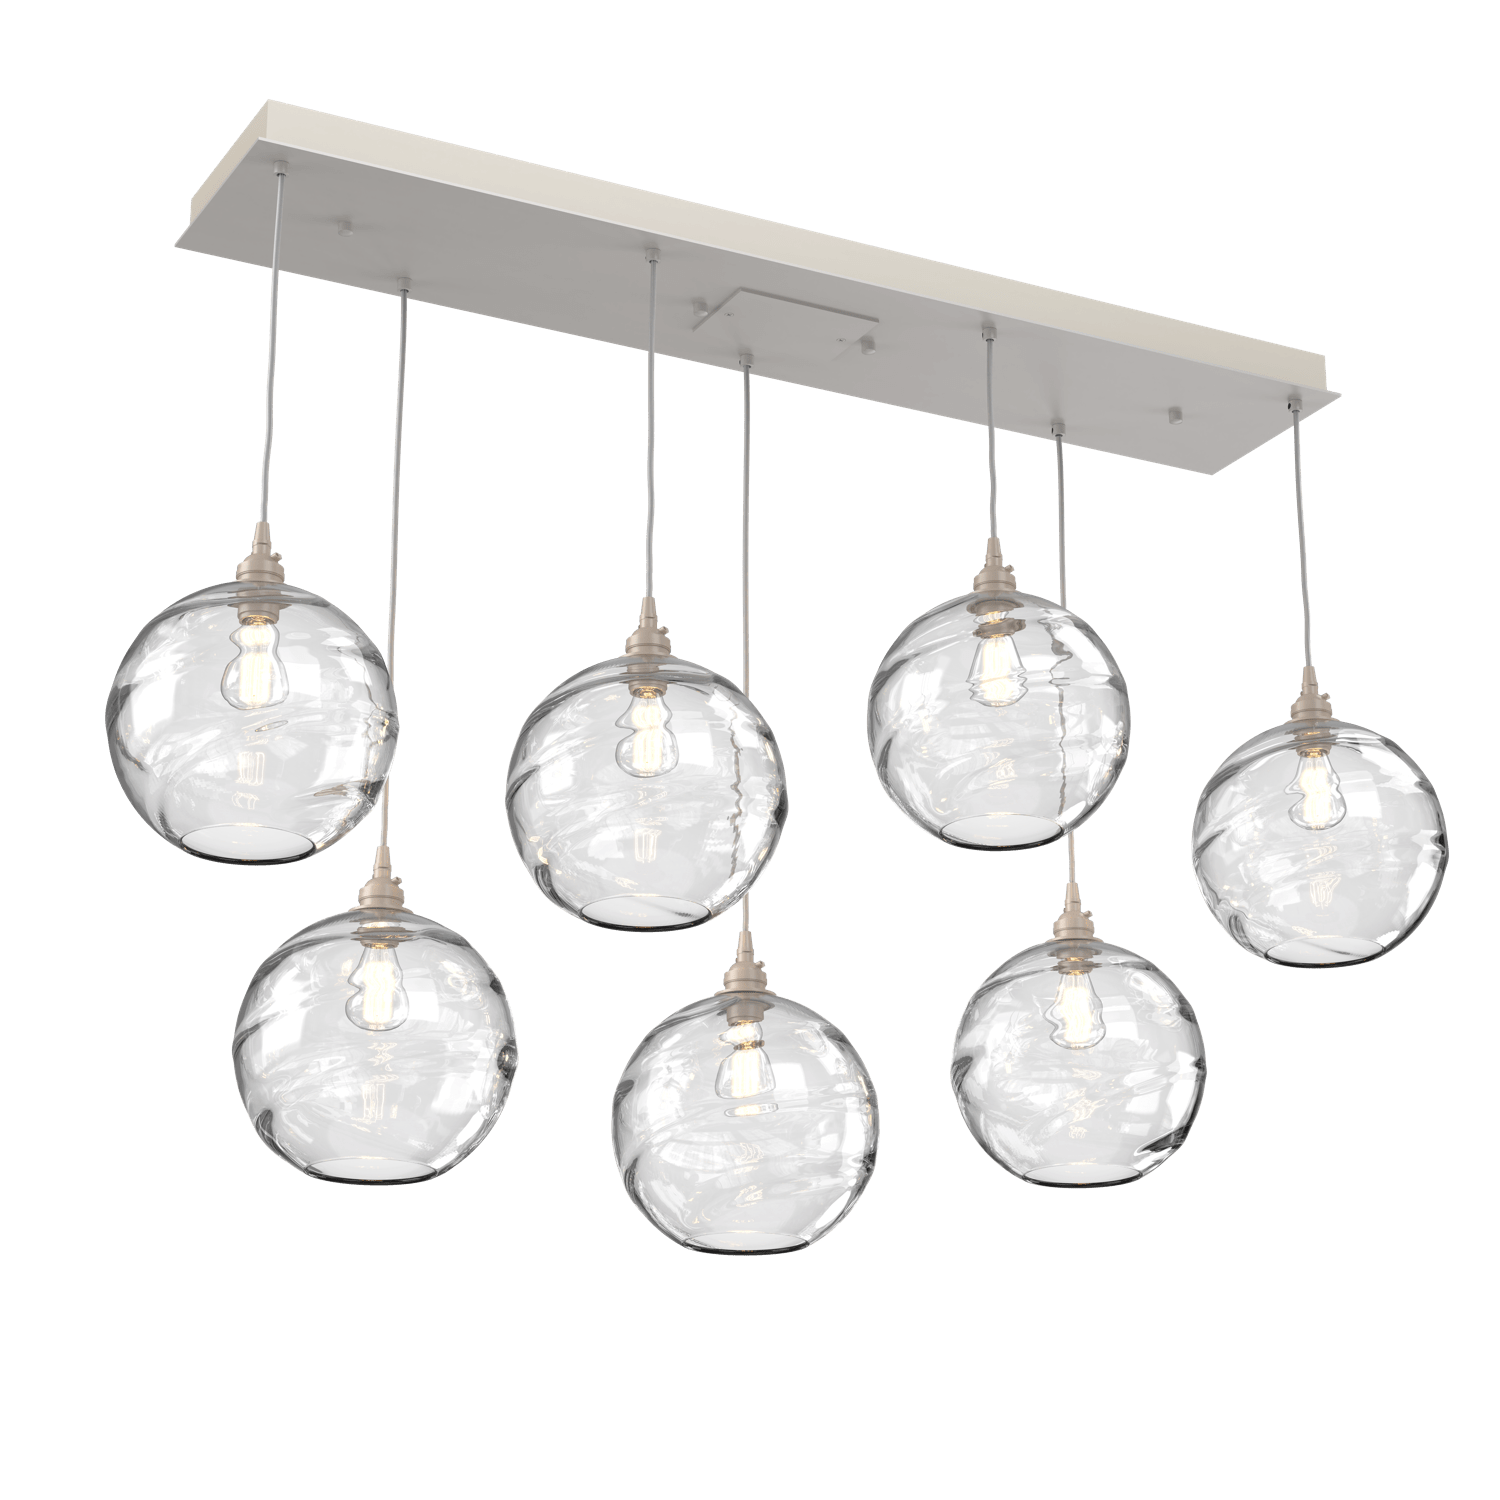 PLB0047-07-BS-OC-Hammerton-Studio-Optic-Blown-Glass-Terra-7-light-linear-pendant-chandelier-with-metallic-beige-silver-finish-and-optic-clear-blown-glass-shades-and-incandescent-lamping